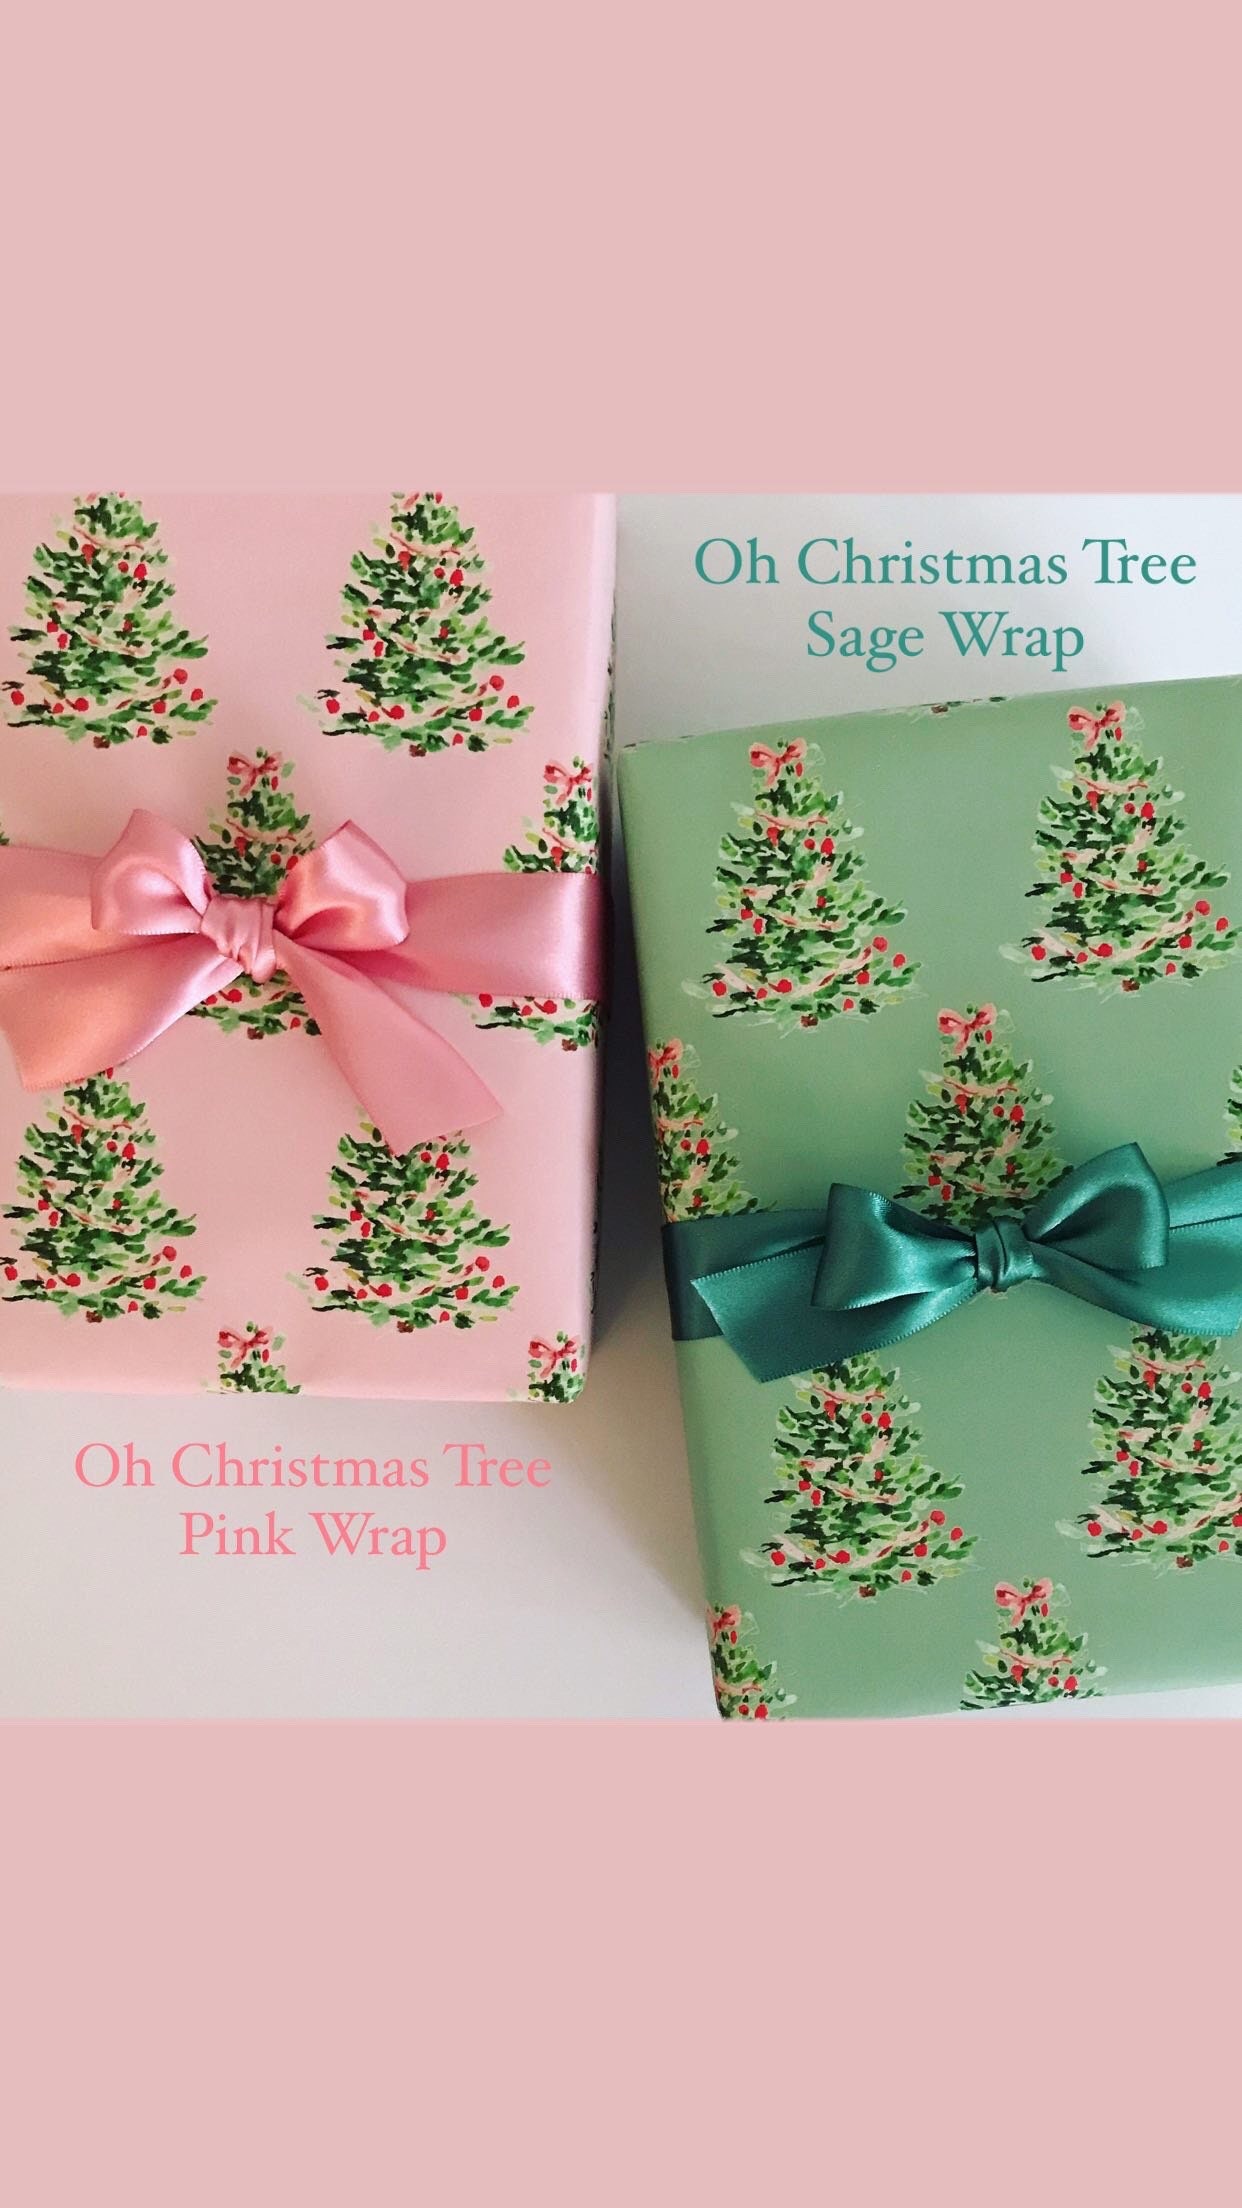 O Christmas Tree Wrapping Paper - 6 FT Roll - Matte Finish *20% Off!*